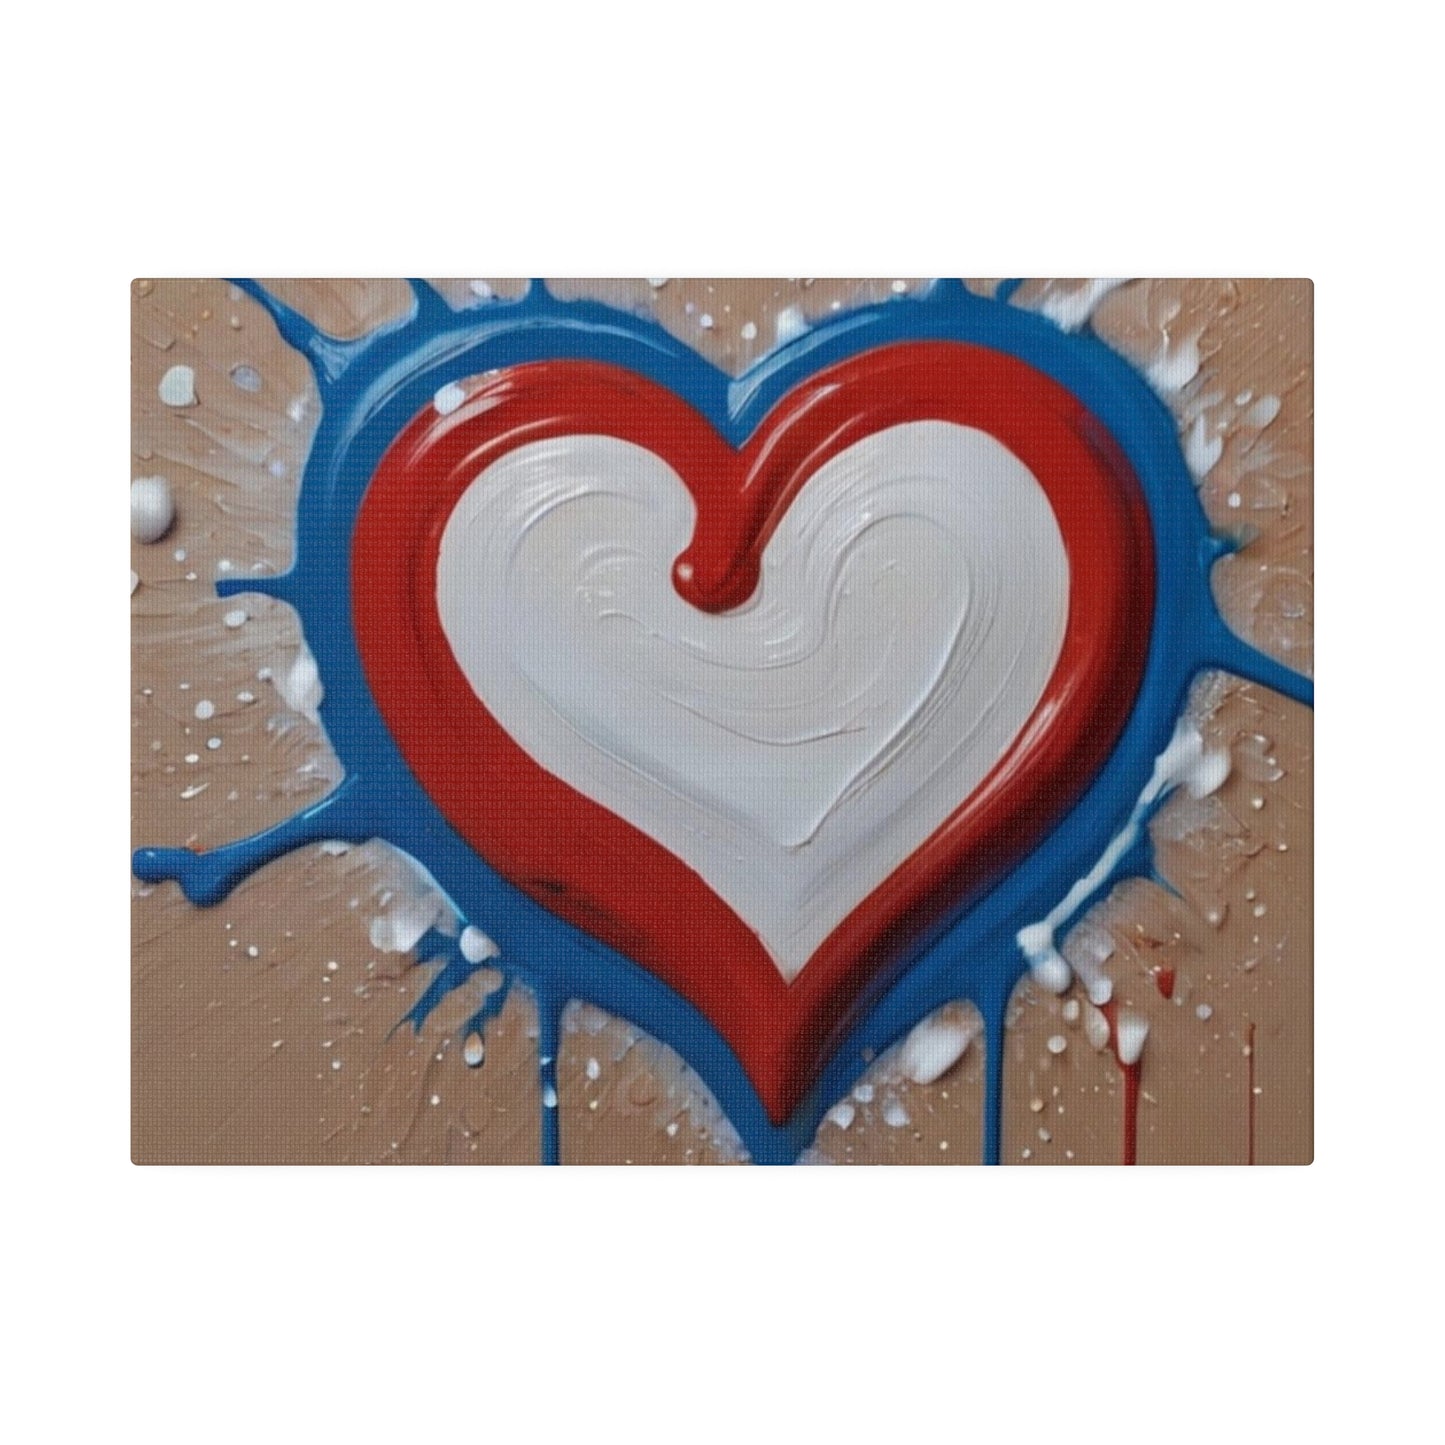 Red, White and Blue Love Heart - Matte Canvas, Stretched, 0.75"